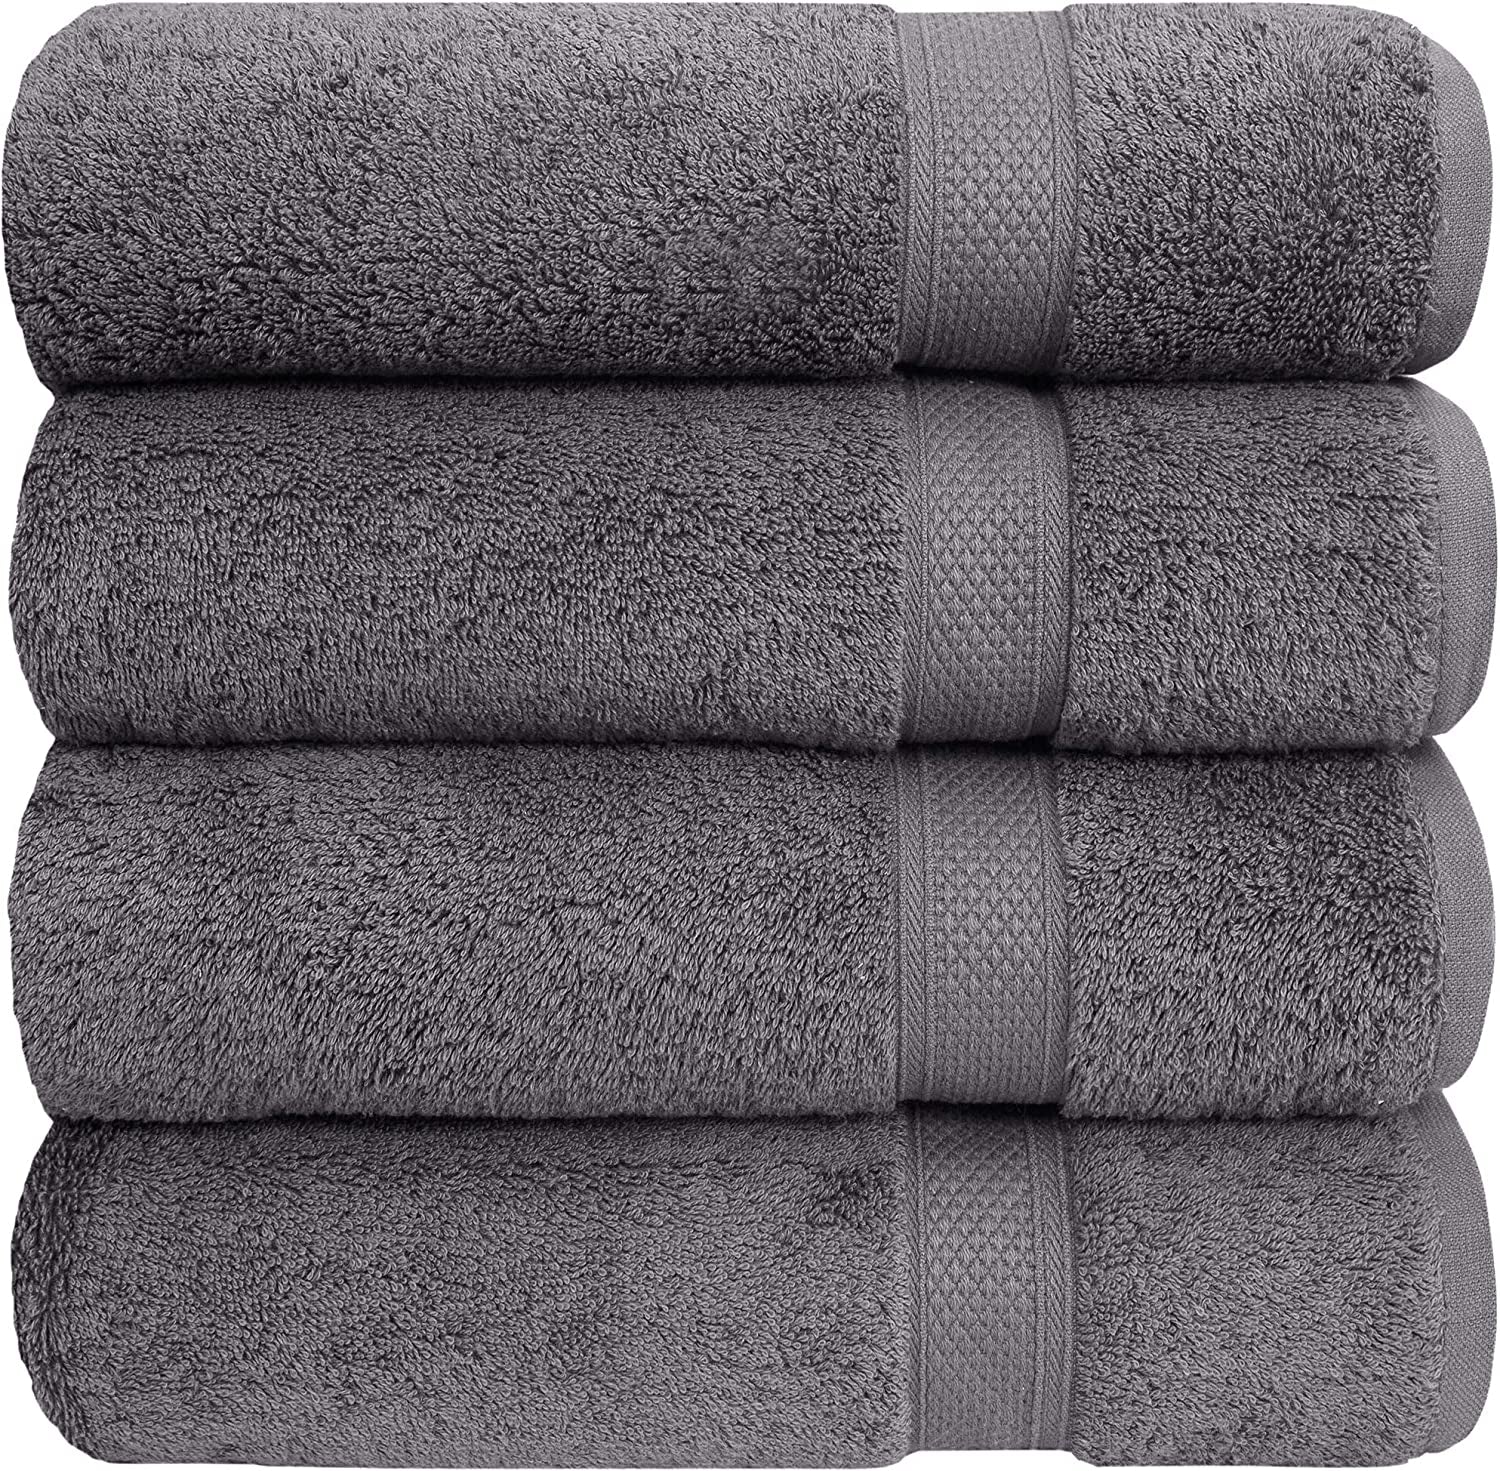 Professional Product Title: "Luxury Bath Towel Set - 100% Cotton, 600 GSM, Soft & Absorbent - Large Size, Hotel Quality - Grey (4 Pack)"